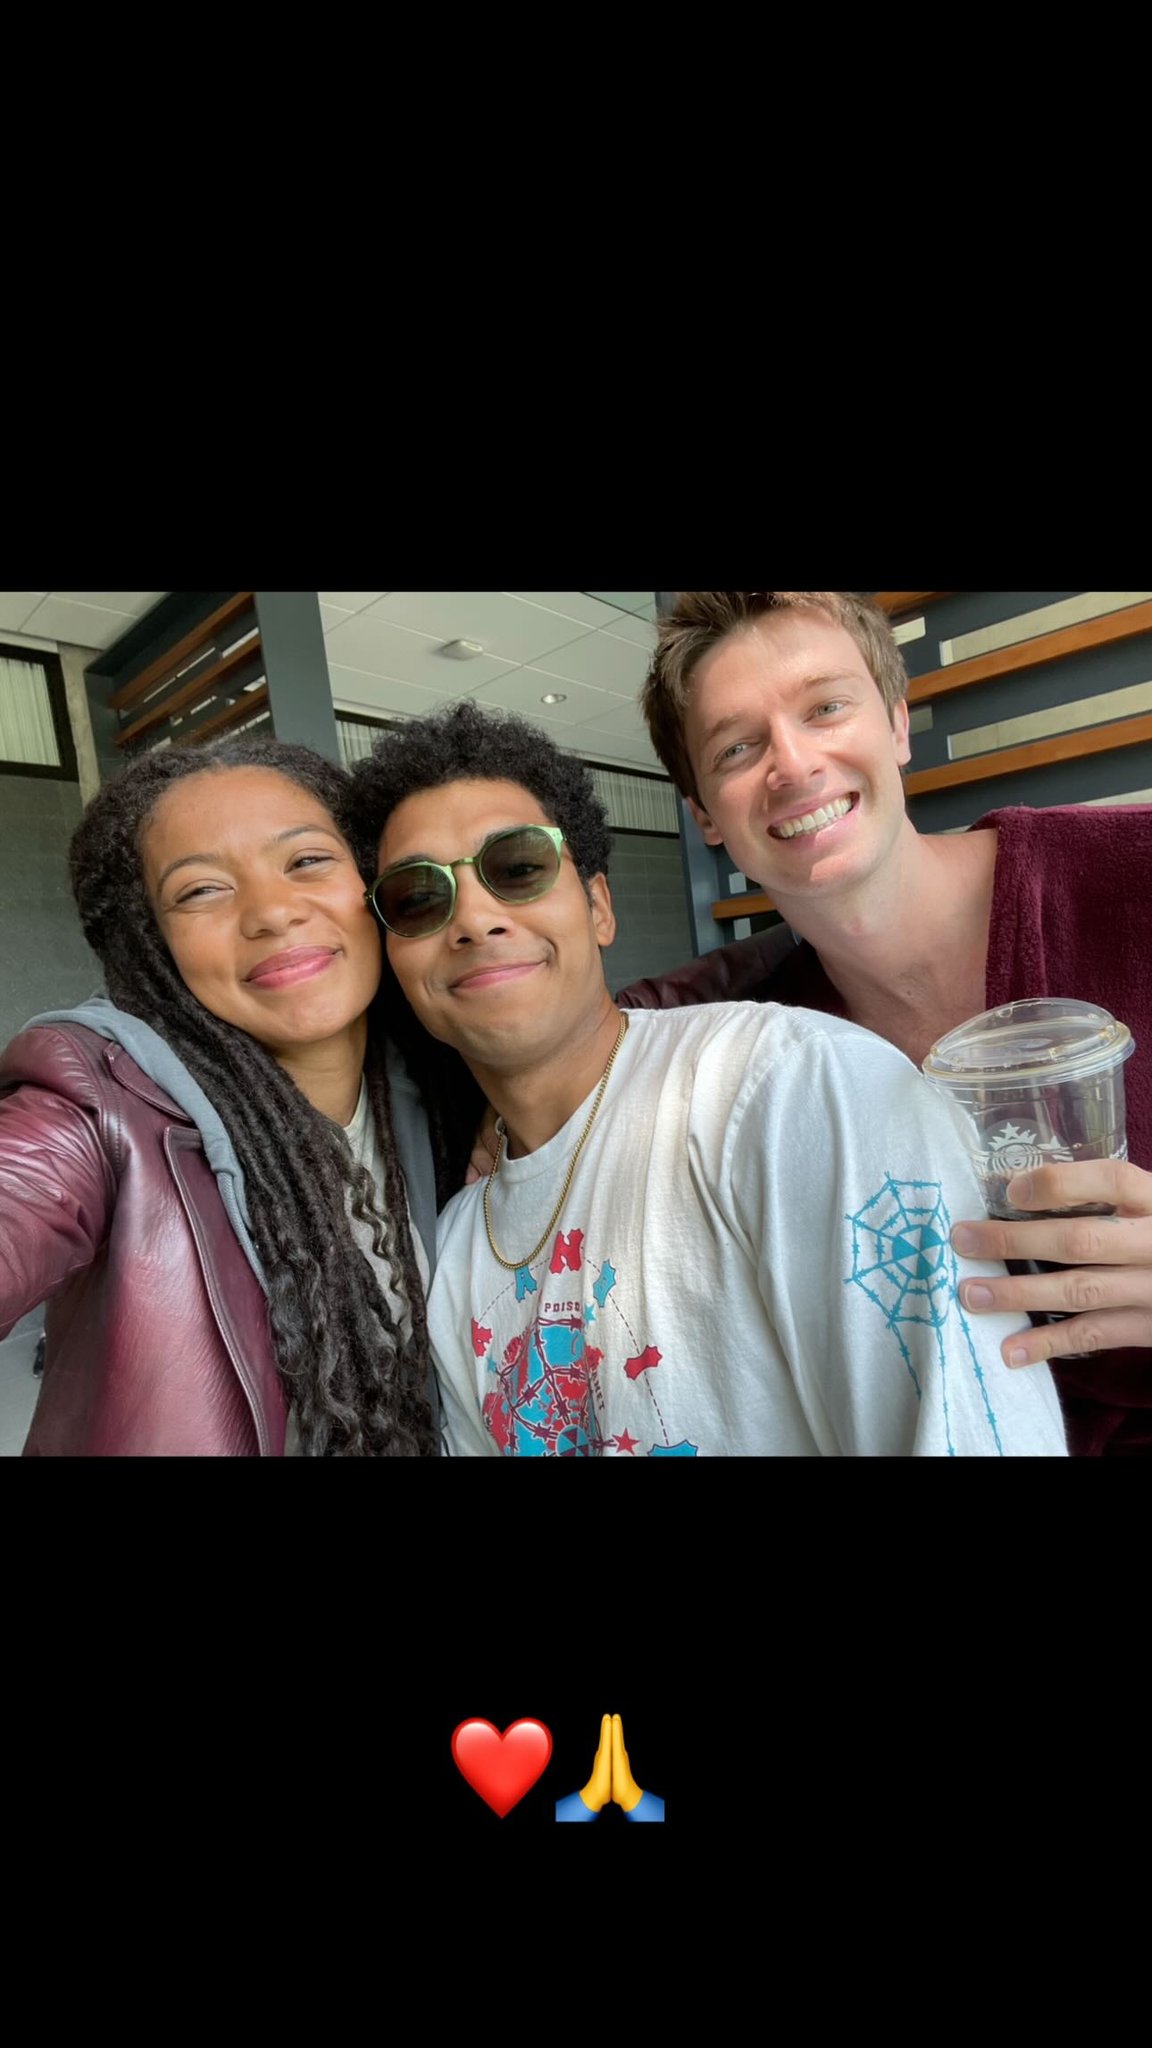 Chance pictured with his Gen Z co-stars Patrick Schwarzenegger and Jaz Sinclair